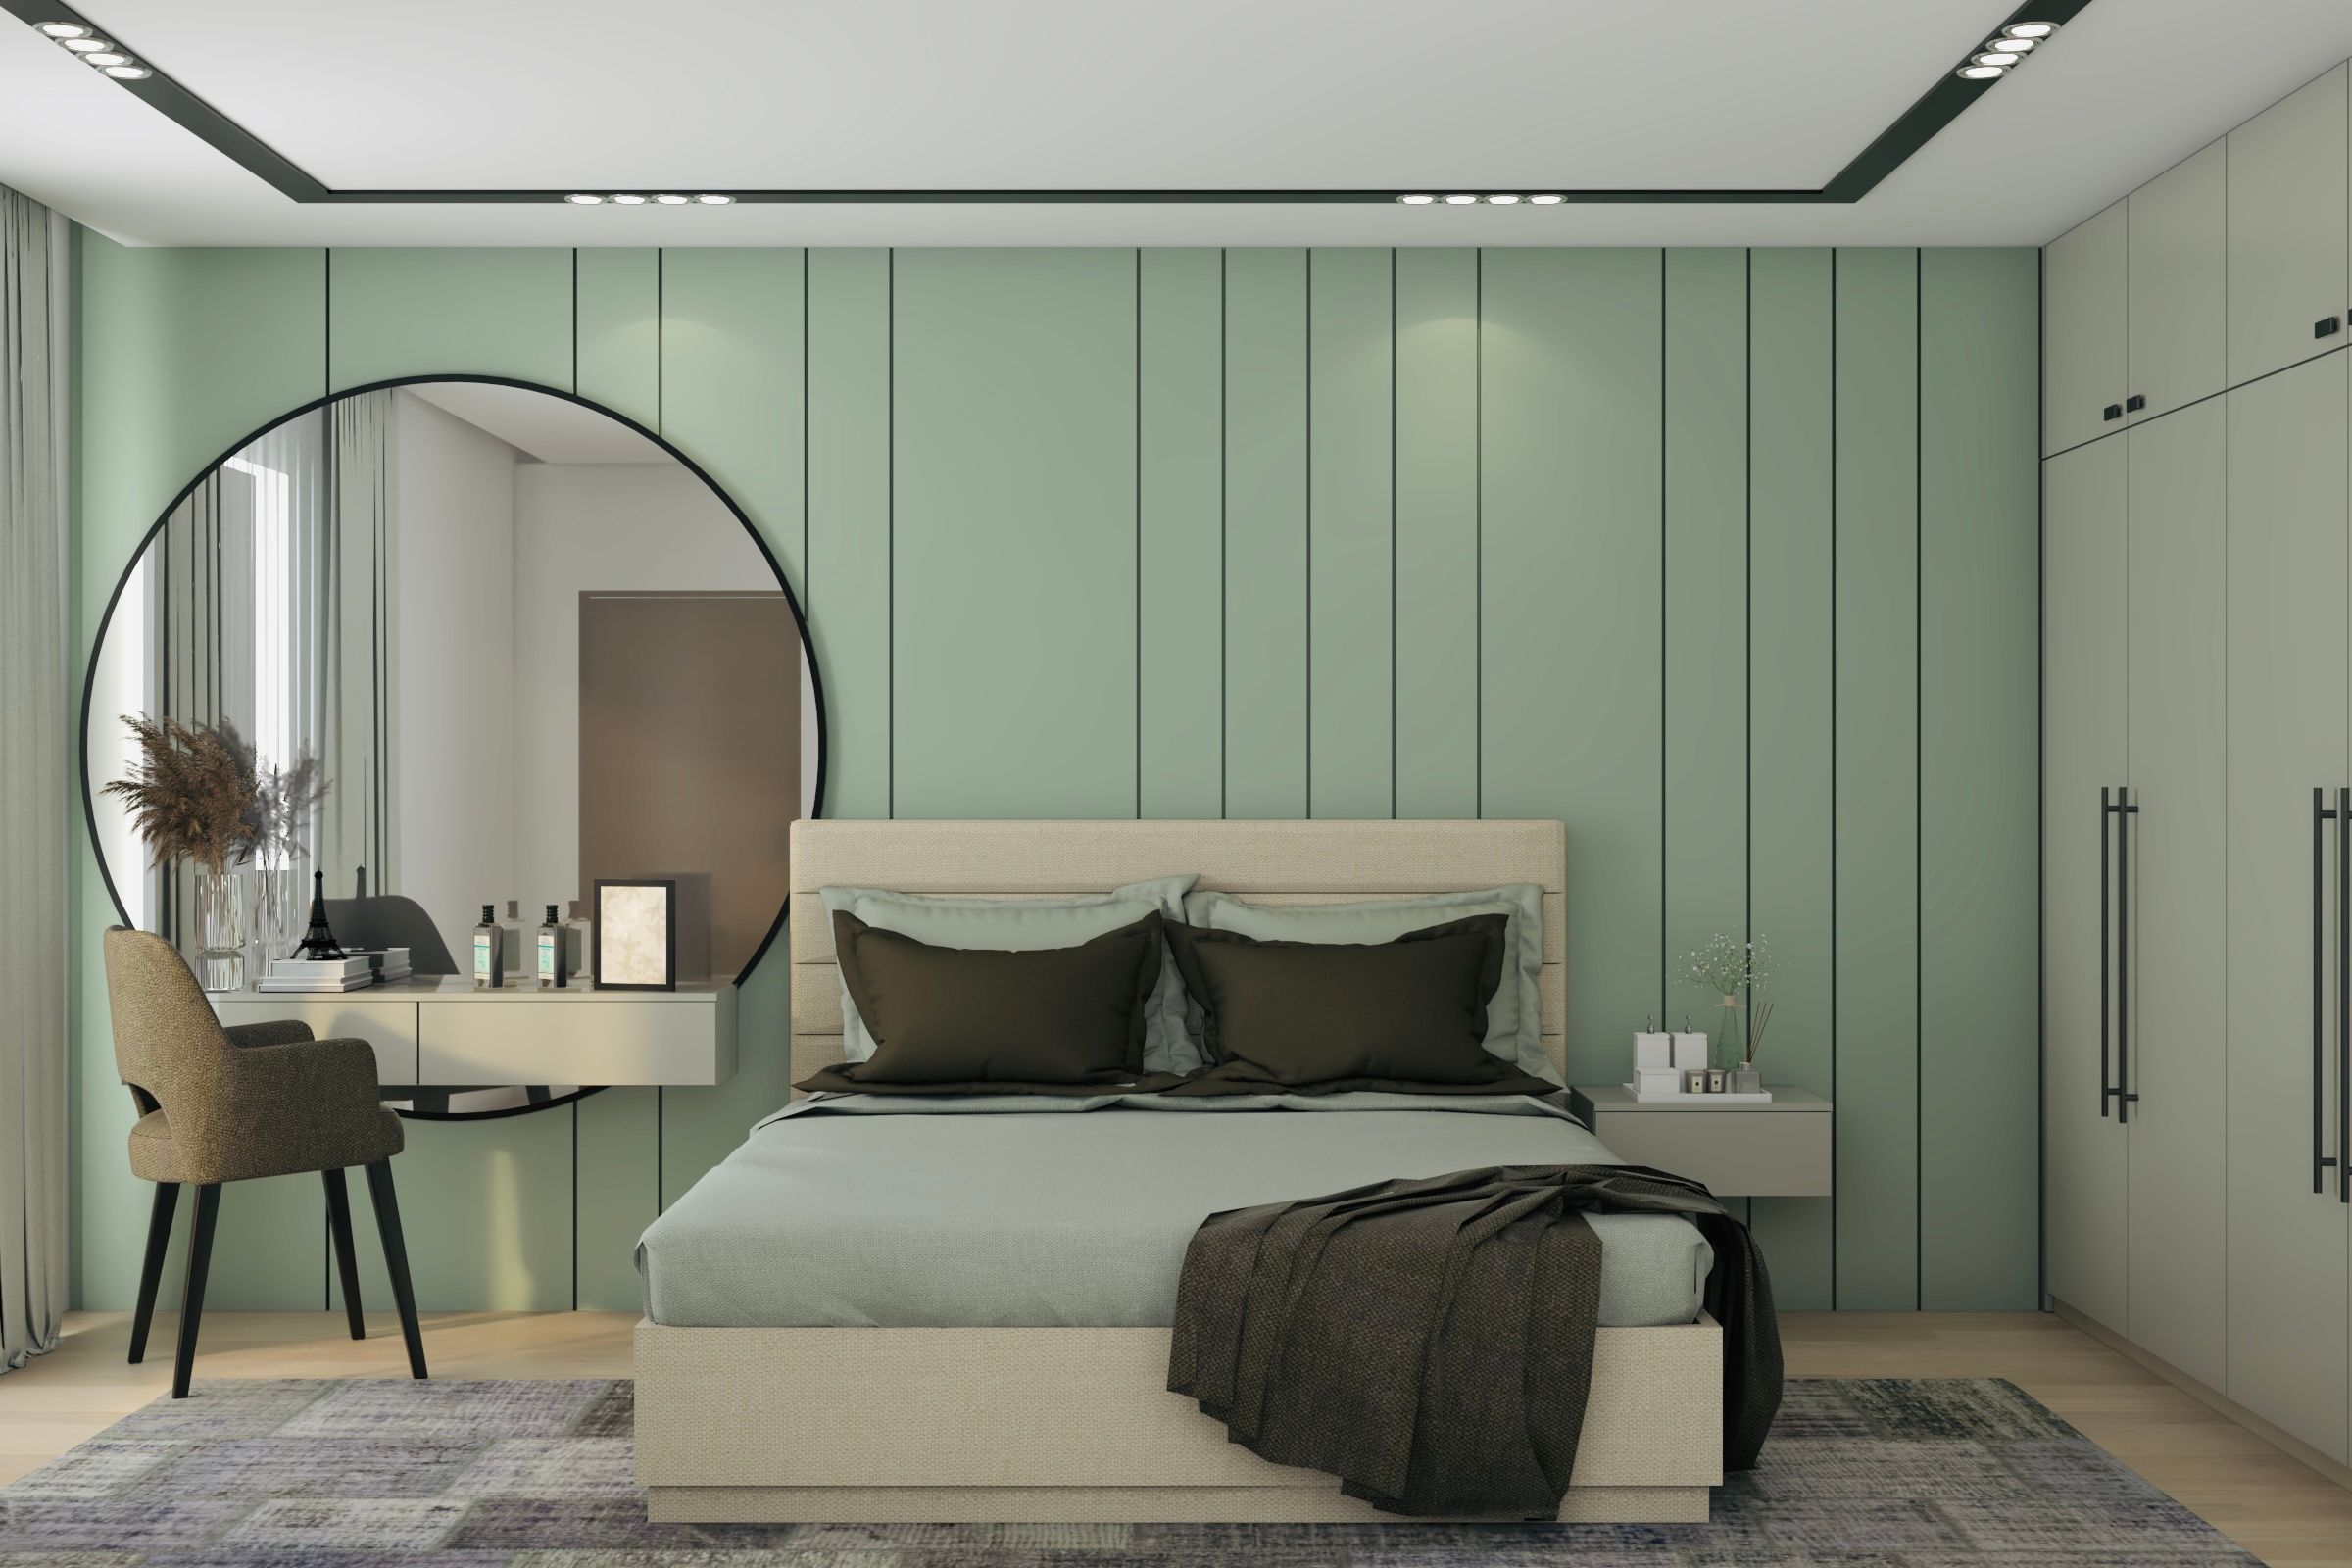 Contemporary Green Bedroom Wall Design With Grooves